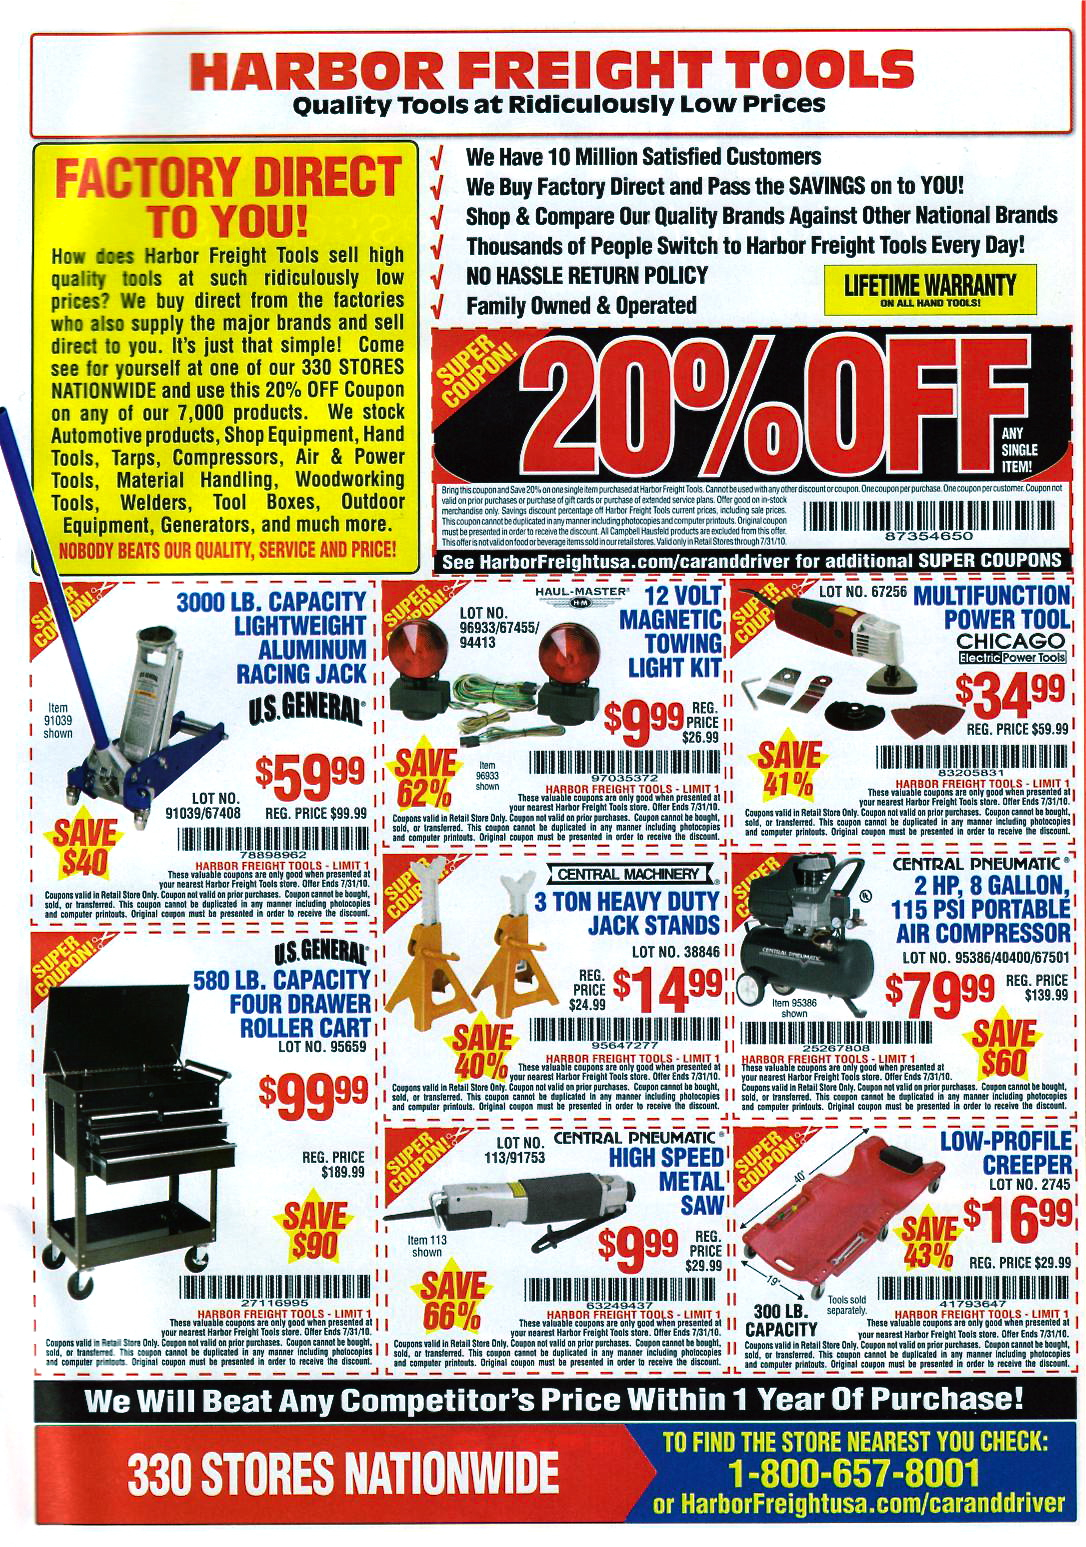 Harbor Freight Coupon Deals From Car And Driver Magazine Do It Projects Plans And How Tos